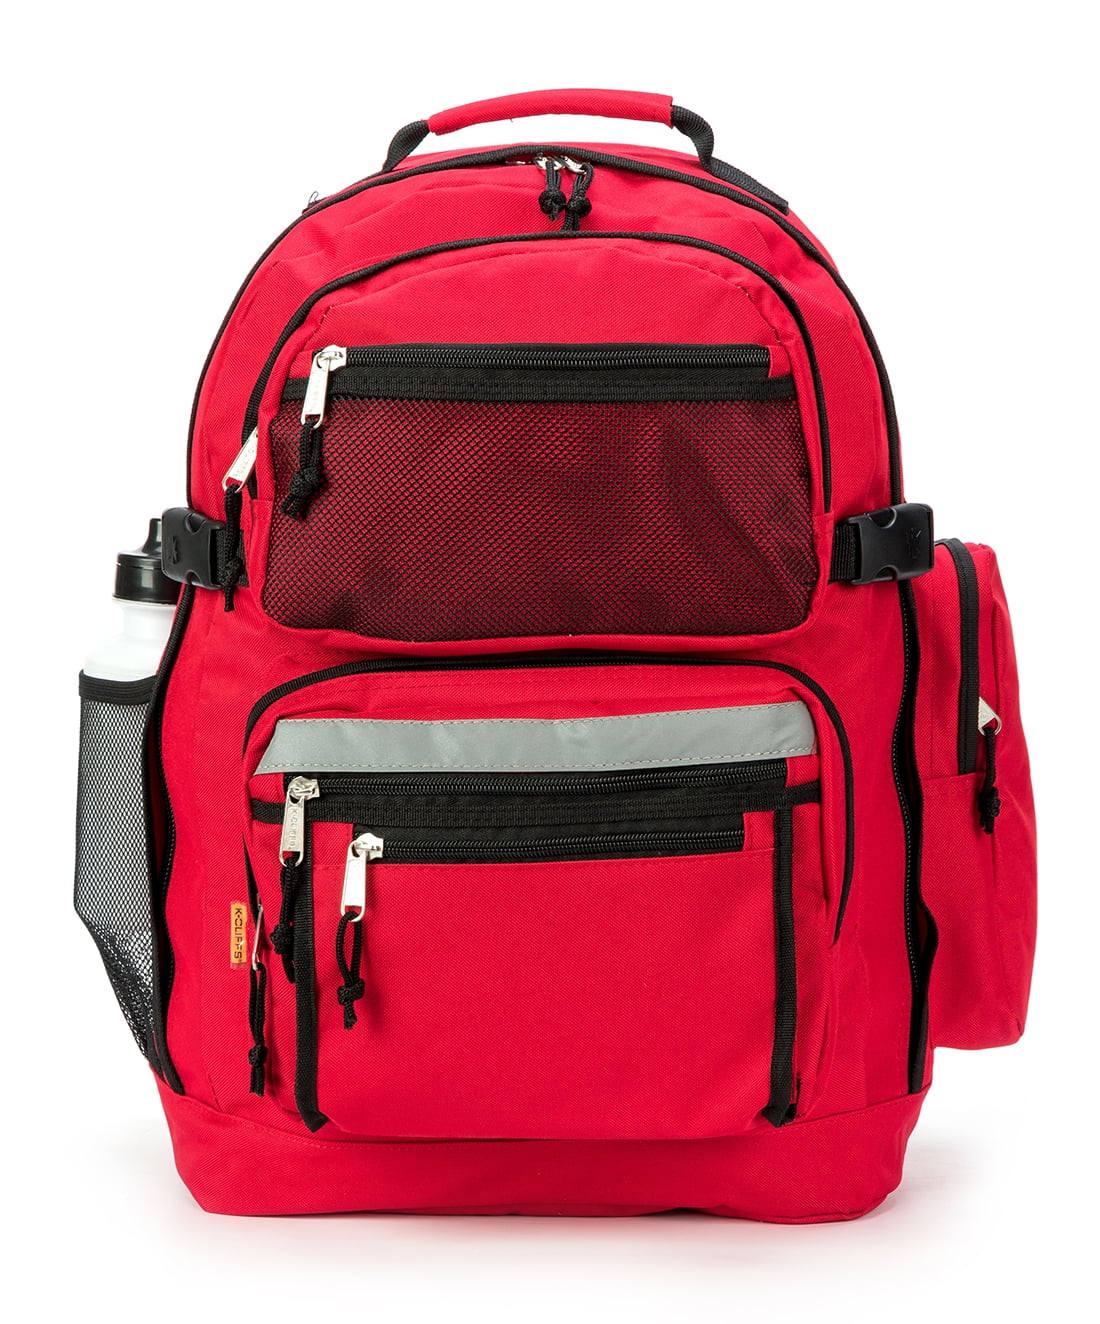 Large Backpack School Bag Book Bag with Free water bottle 19 Inches Red 19 x 13 x 8 - 0